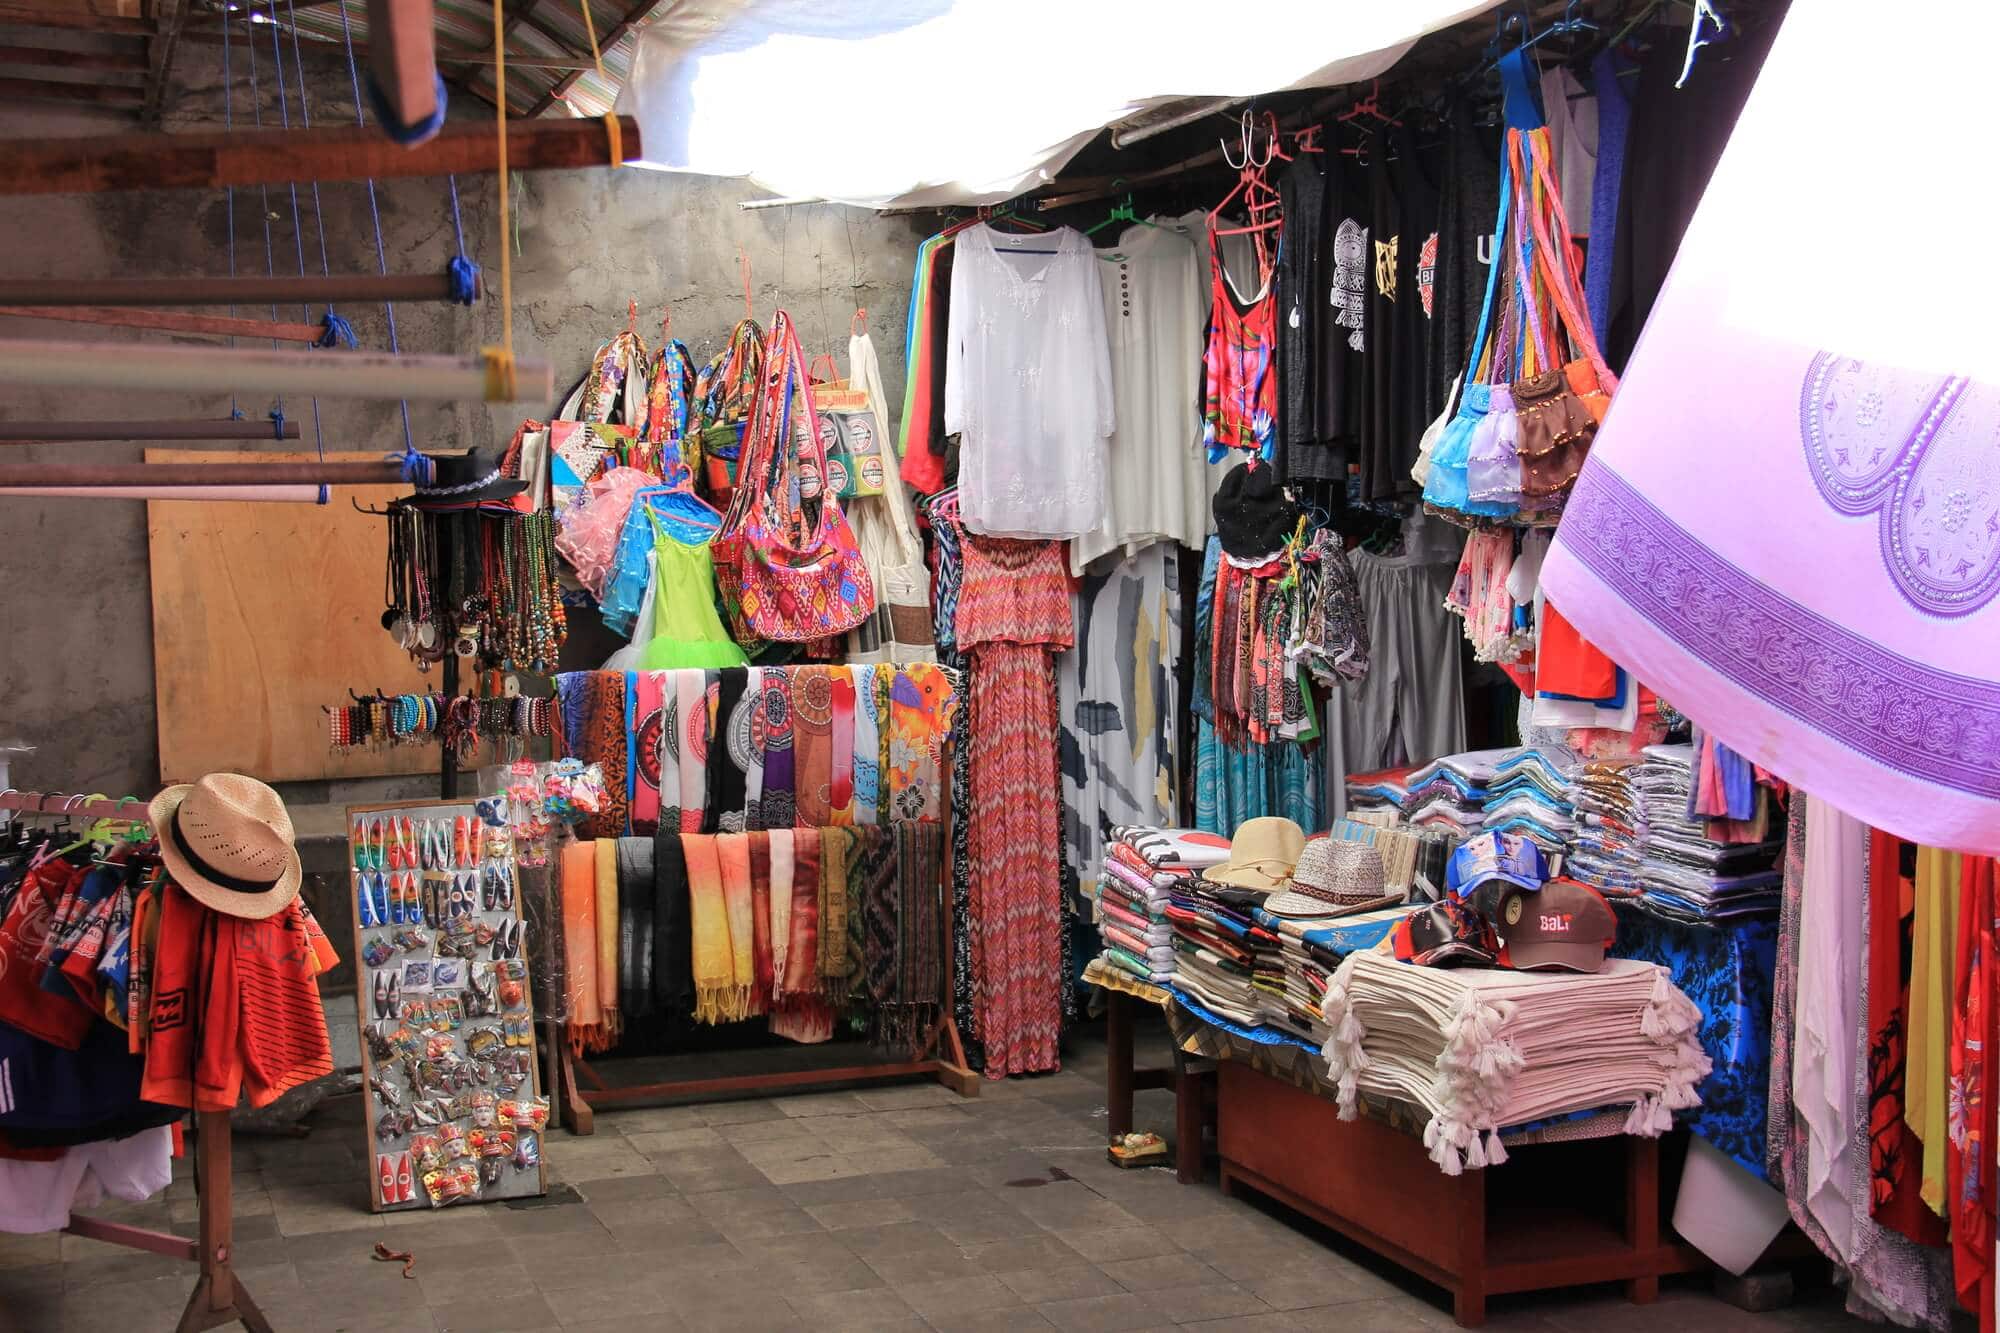 Everything you need to know about the most common scams in Bali - Overcharging at markets